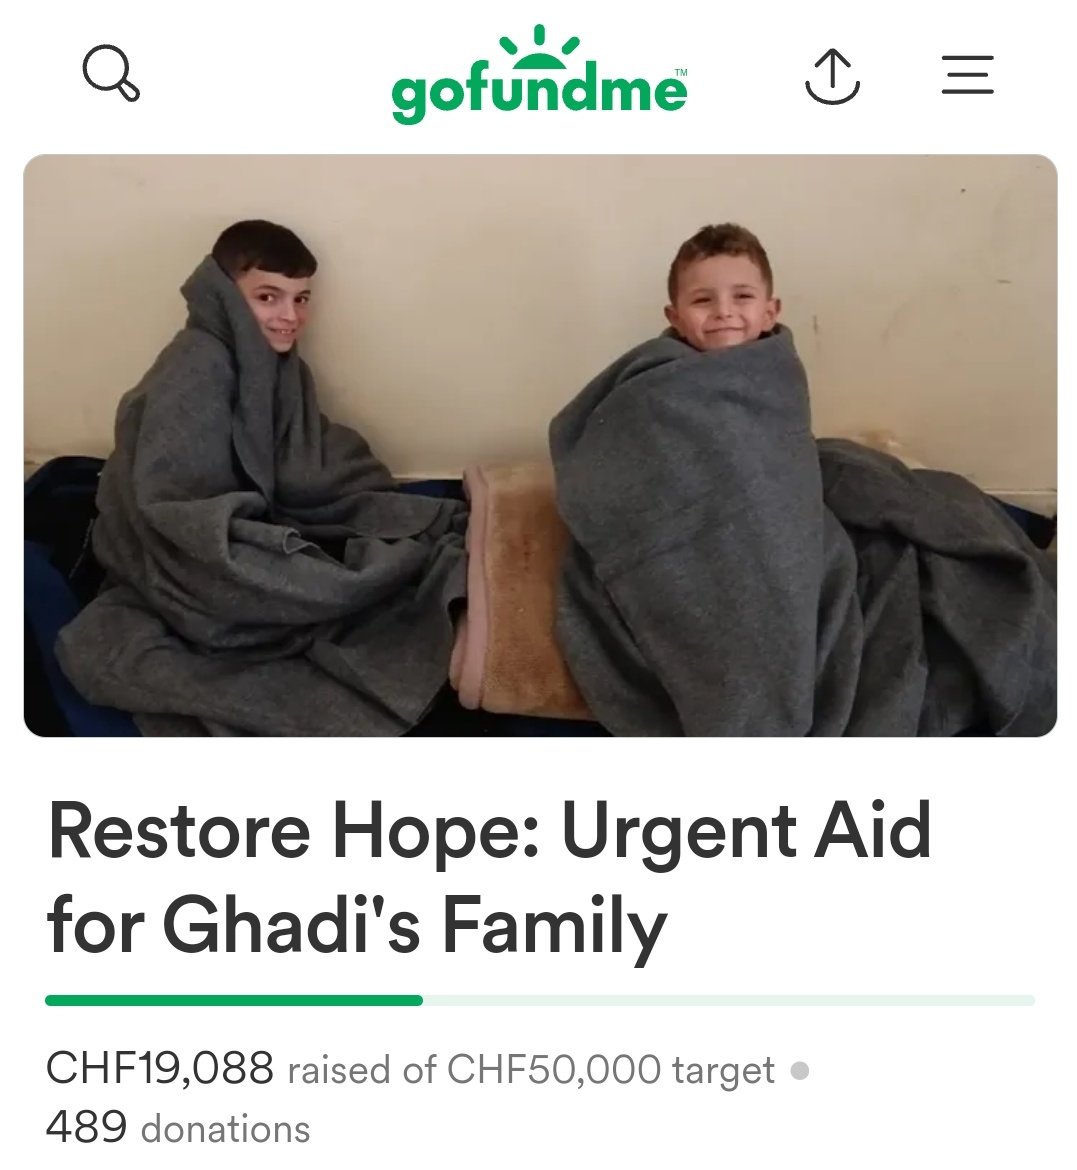 Thank you, donors 🫶🏻 
The goal of 18k chf and 19k has been closed ✅️ and we are close to the near goal of 20k. This goal will guarantee the safety of half the family to Egypt.

⛔️ Please Share and Donate 🍉
gofundme.com/f/restore-hope…